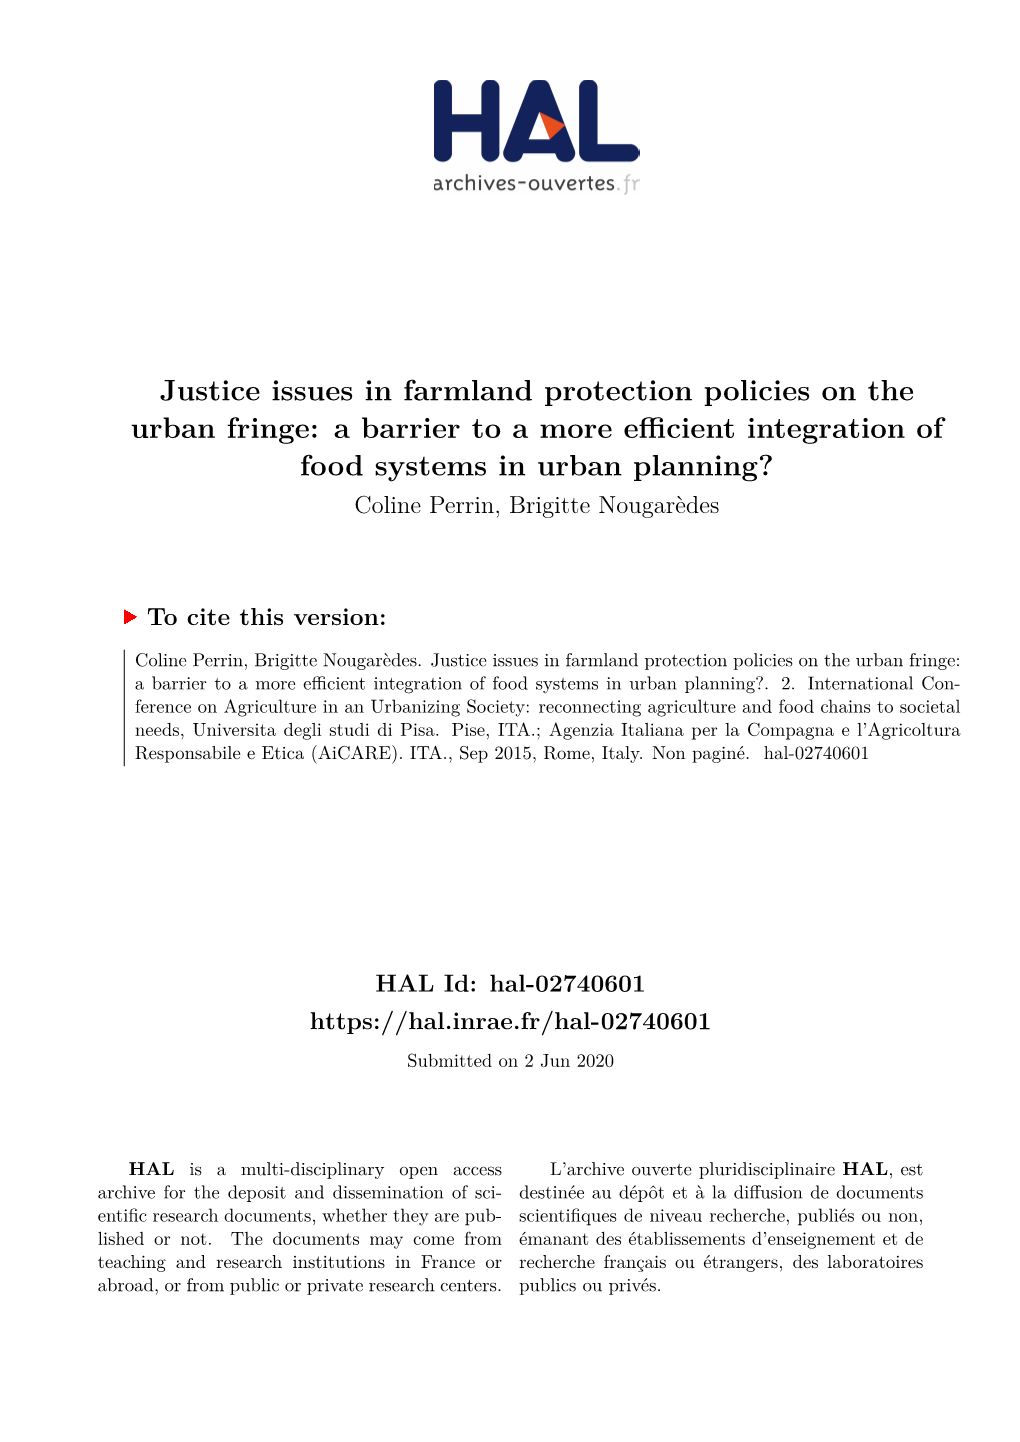 Justice Issues in Farmland Protection Policies on the Urban Fringe: A